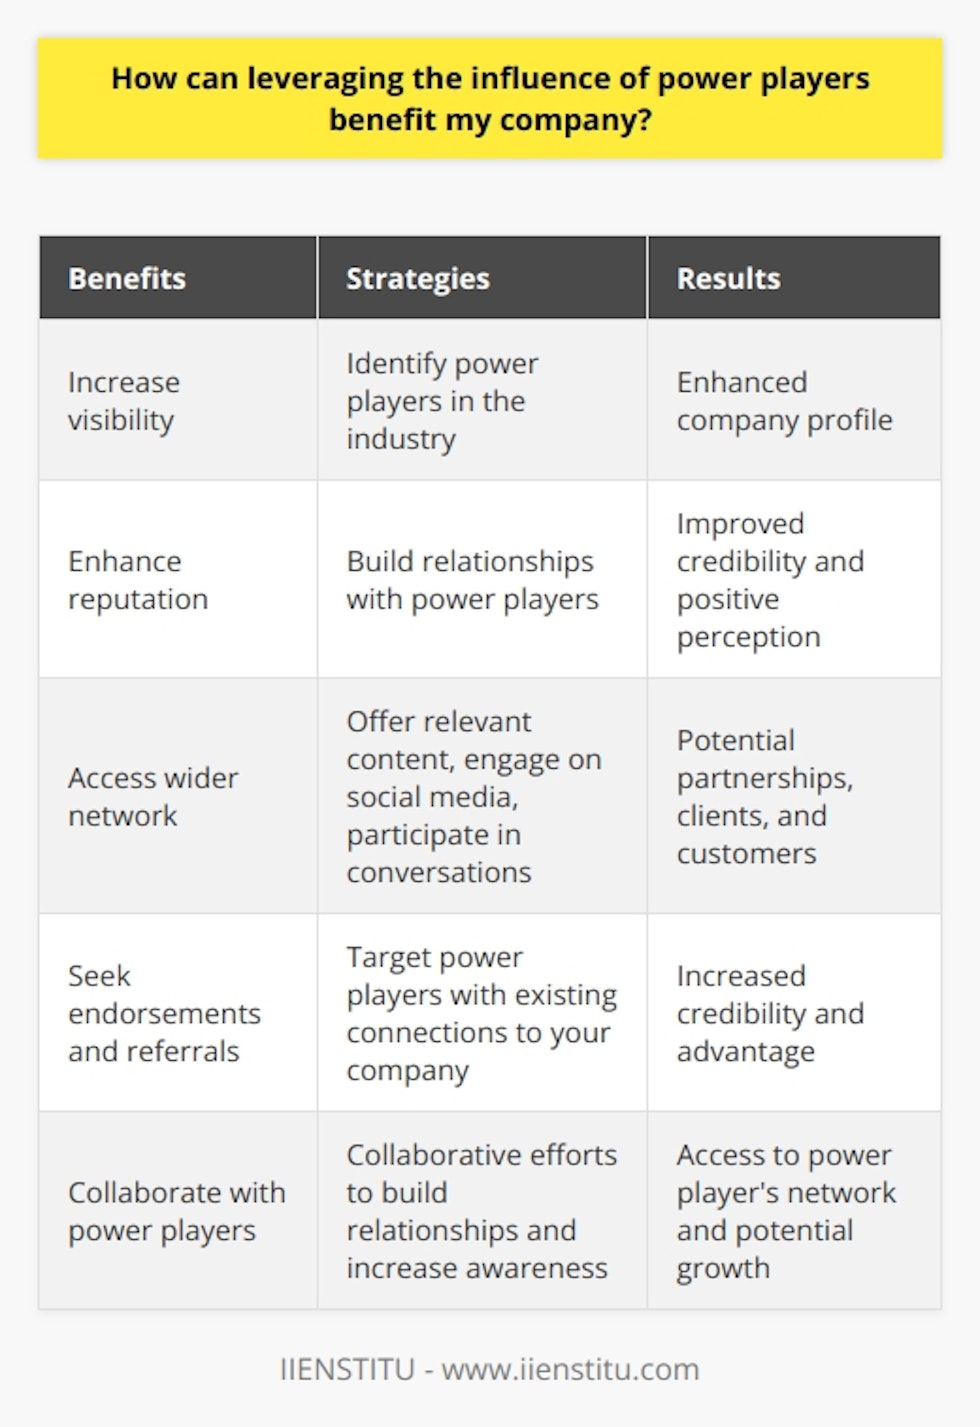 Businesses are always looking for ways to assert their influence in their respective industries and increase the visibility of their products and services. One effective strategy is to leverage the influence of power players in the industry. Power players are influential individuals who can help elevate a company's profile through their positive reputation, industry contacts, and social media platforms.To begin leveraging the influence of power players, it is crucial to identify who these individuals are. This can be done by analyzing the industry and determining which individuals have the most significant following, are highly active on social media, and possess a good reputation among customers and clients. Once identified, it is important to start building relationships with them.Building relationships with power players can be achieved by offering them relevant content about your products or services, engaging with them on social media, and participating in meaningful conversations. By actively involving yourself in their online discussions and providing valuable insights, you can establish rapport and gain their attention.Once relationships have been established, businesses can begin leveraging the power players' influence. One way to do this is by seeking product or service endorsements and referrals. When seeking endorsements or referrals, it is crucial to target power players who already have a connection to your company and its services. By collaborating with power players who already have a relationship with your business, you can increase the credibility of the endorsement or referral, improving the chances of gaining an advantage from such an arrangement.Collaborating with power players can also be highly beneficial. Collaborative efforts can help build strong relationships between the power player and your business, increase awareness of your services, and provide access to the power player's extensive network of contacts. This broader network can lead to potential partnerships, clients, and customers for your business.In conclusion, leveraging the influence of power players can greatly benefit your company. By increasing visibility, enhancing reputation, and gaining access to a wider network of potential customers and clients, businesses can achieve significant growth and success. Remember to identify who the power players are in your industry, build relationships with them, and then leverage their influence through endorsements, referrals, and collaborations.